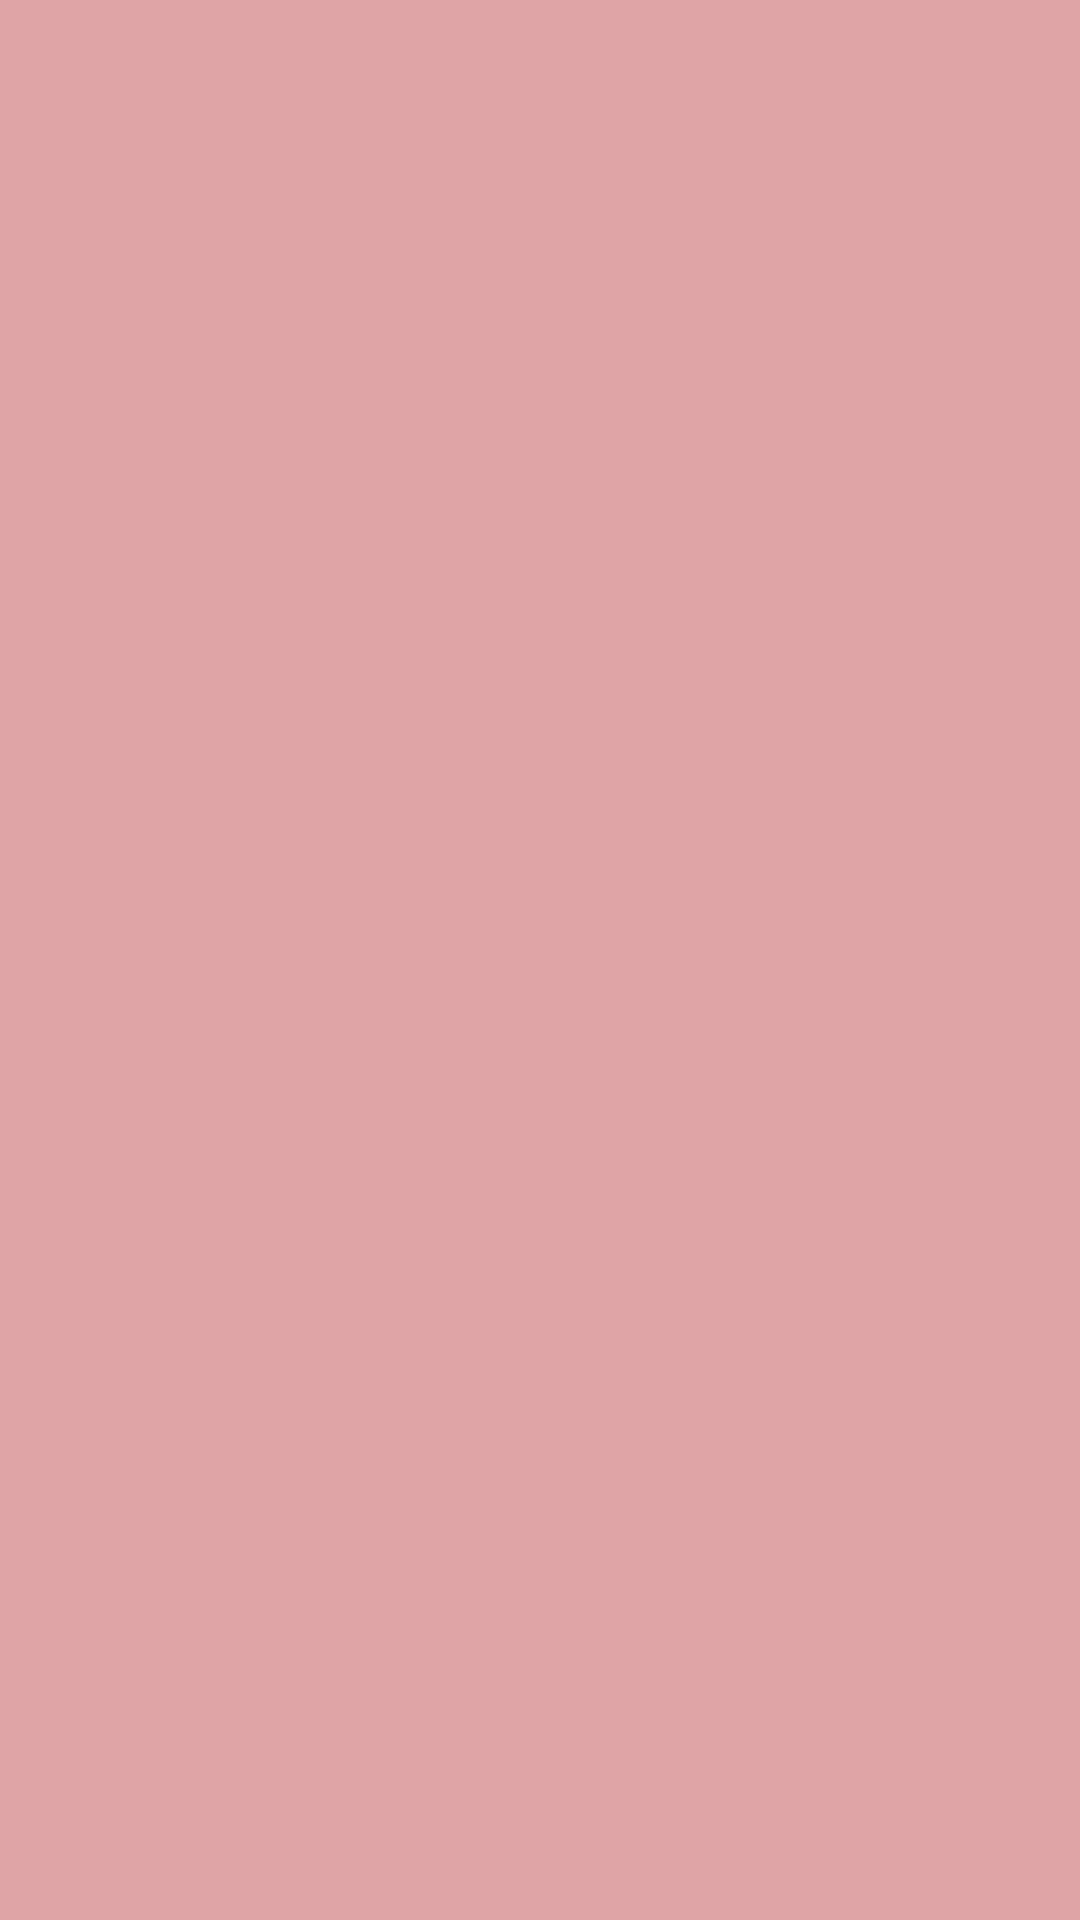 1080x1920 Pastel Pink Solid Color Background